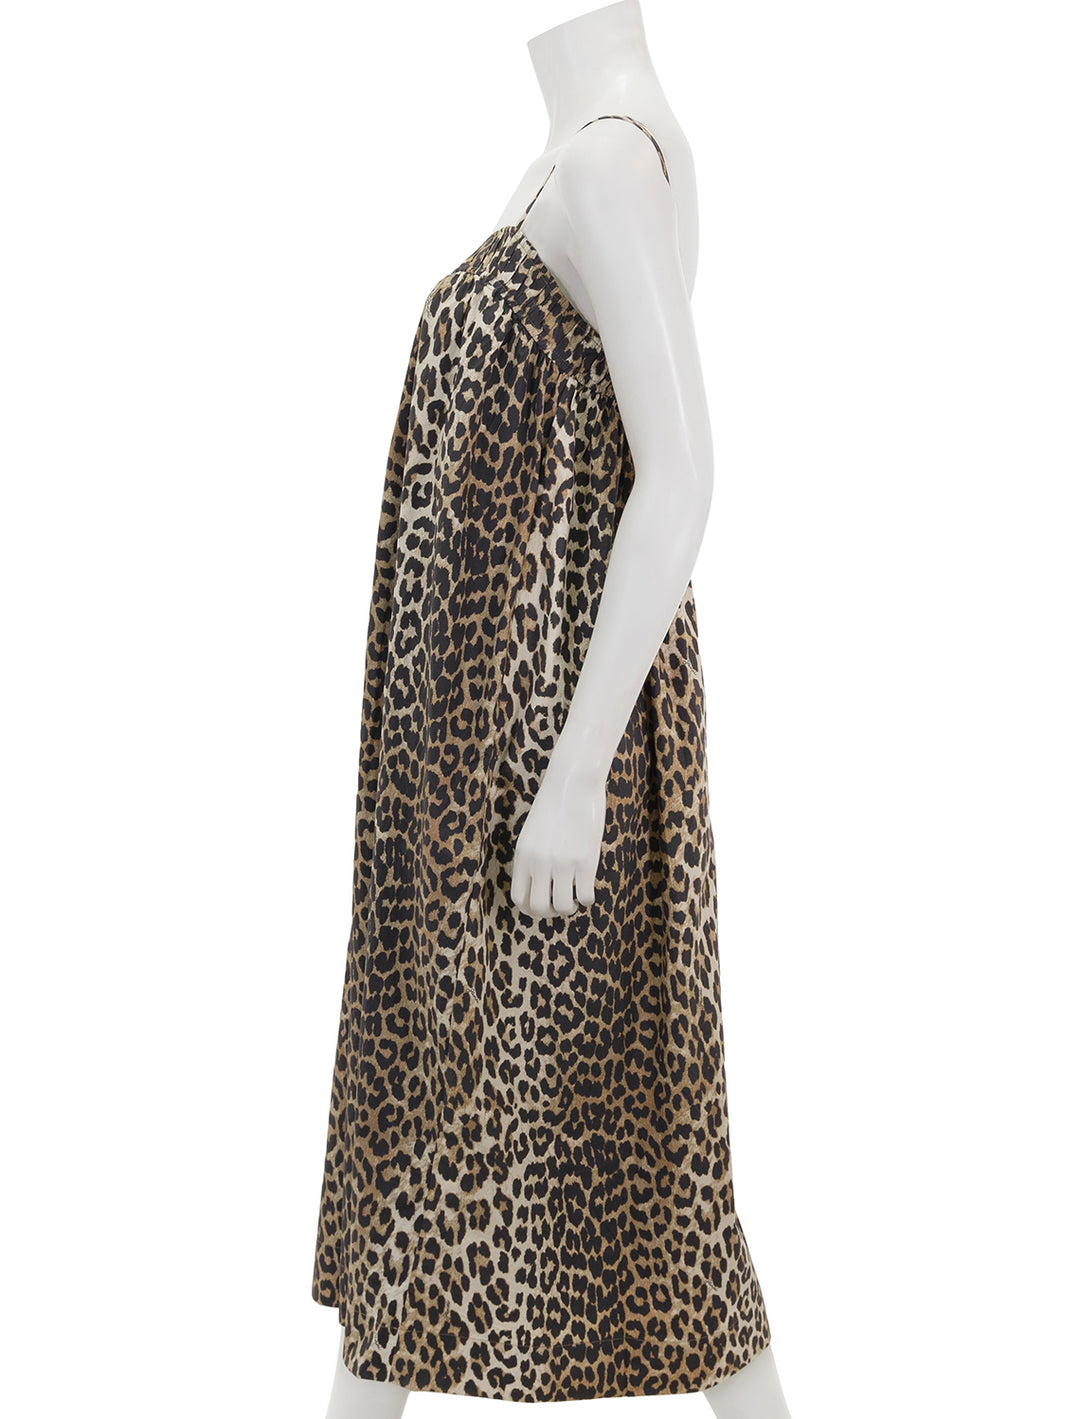 Side view of GANNI's printed cotton midi dress in leopard.